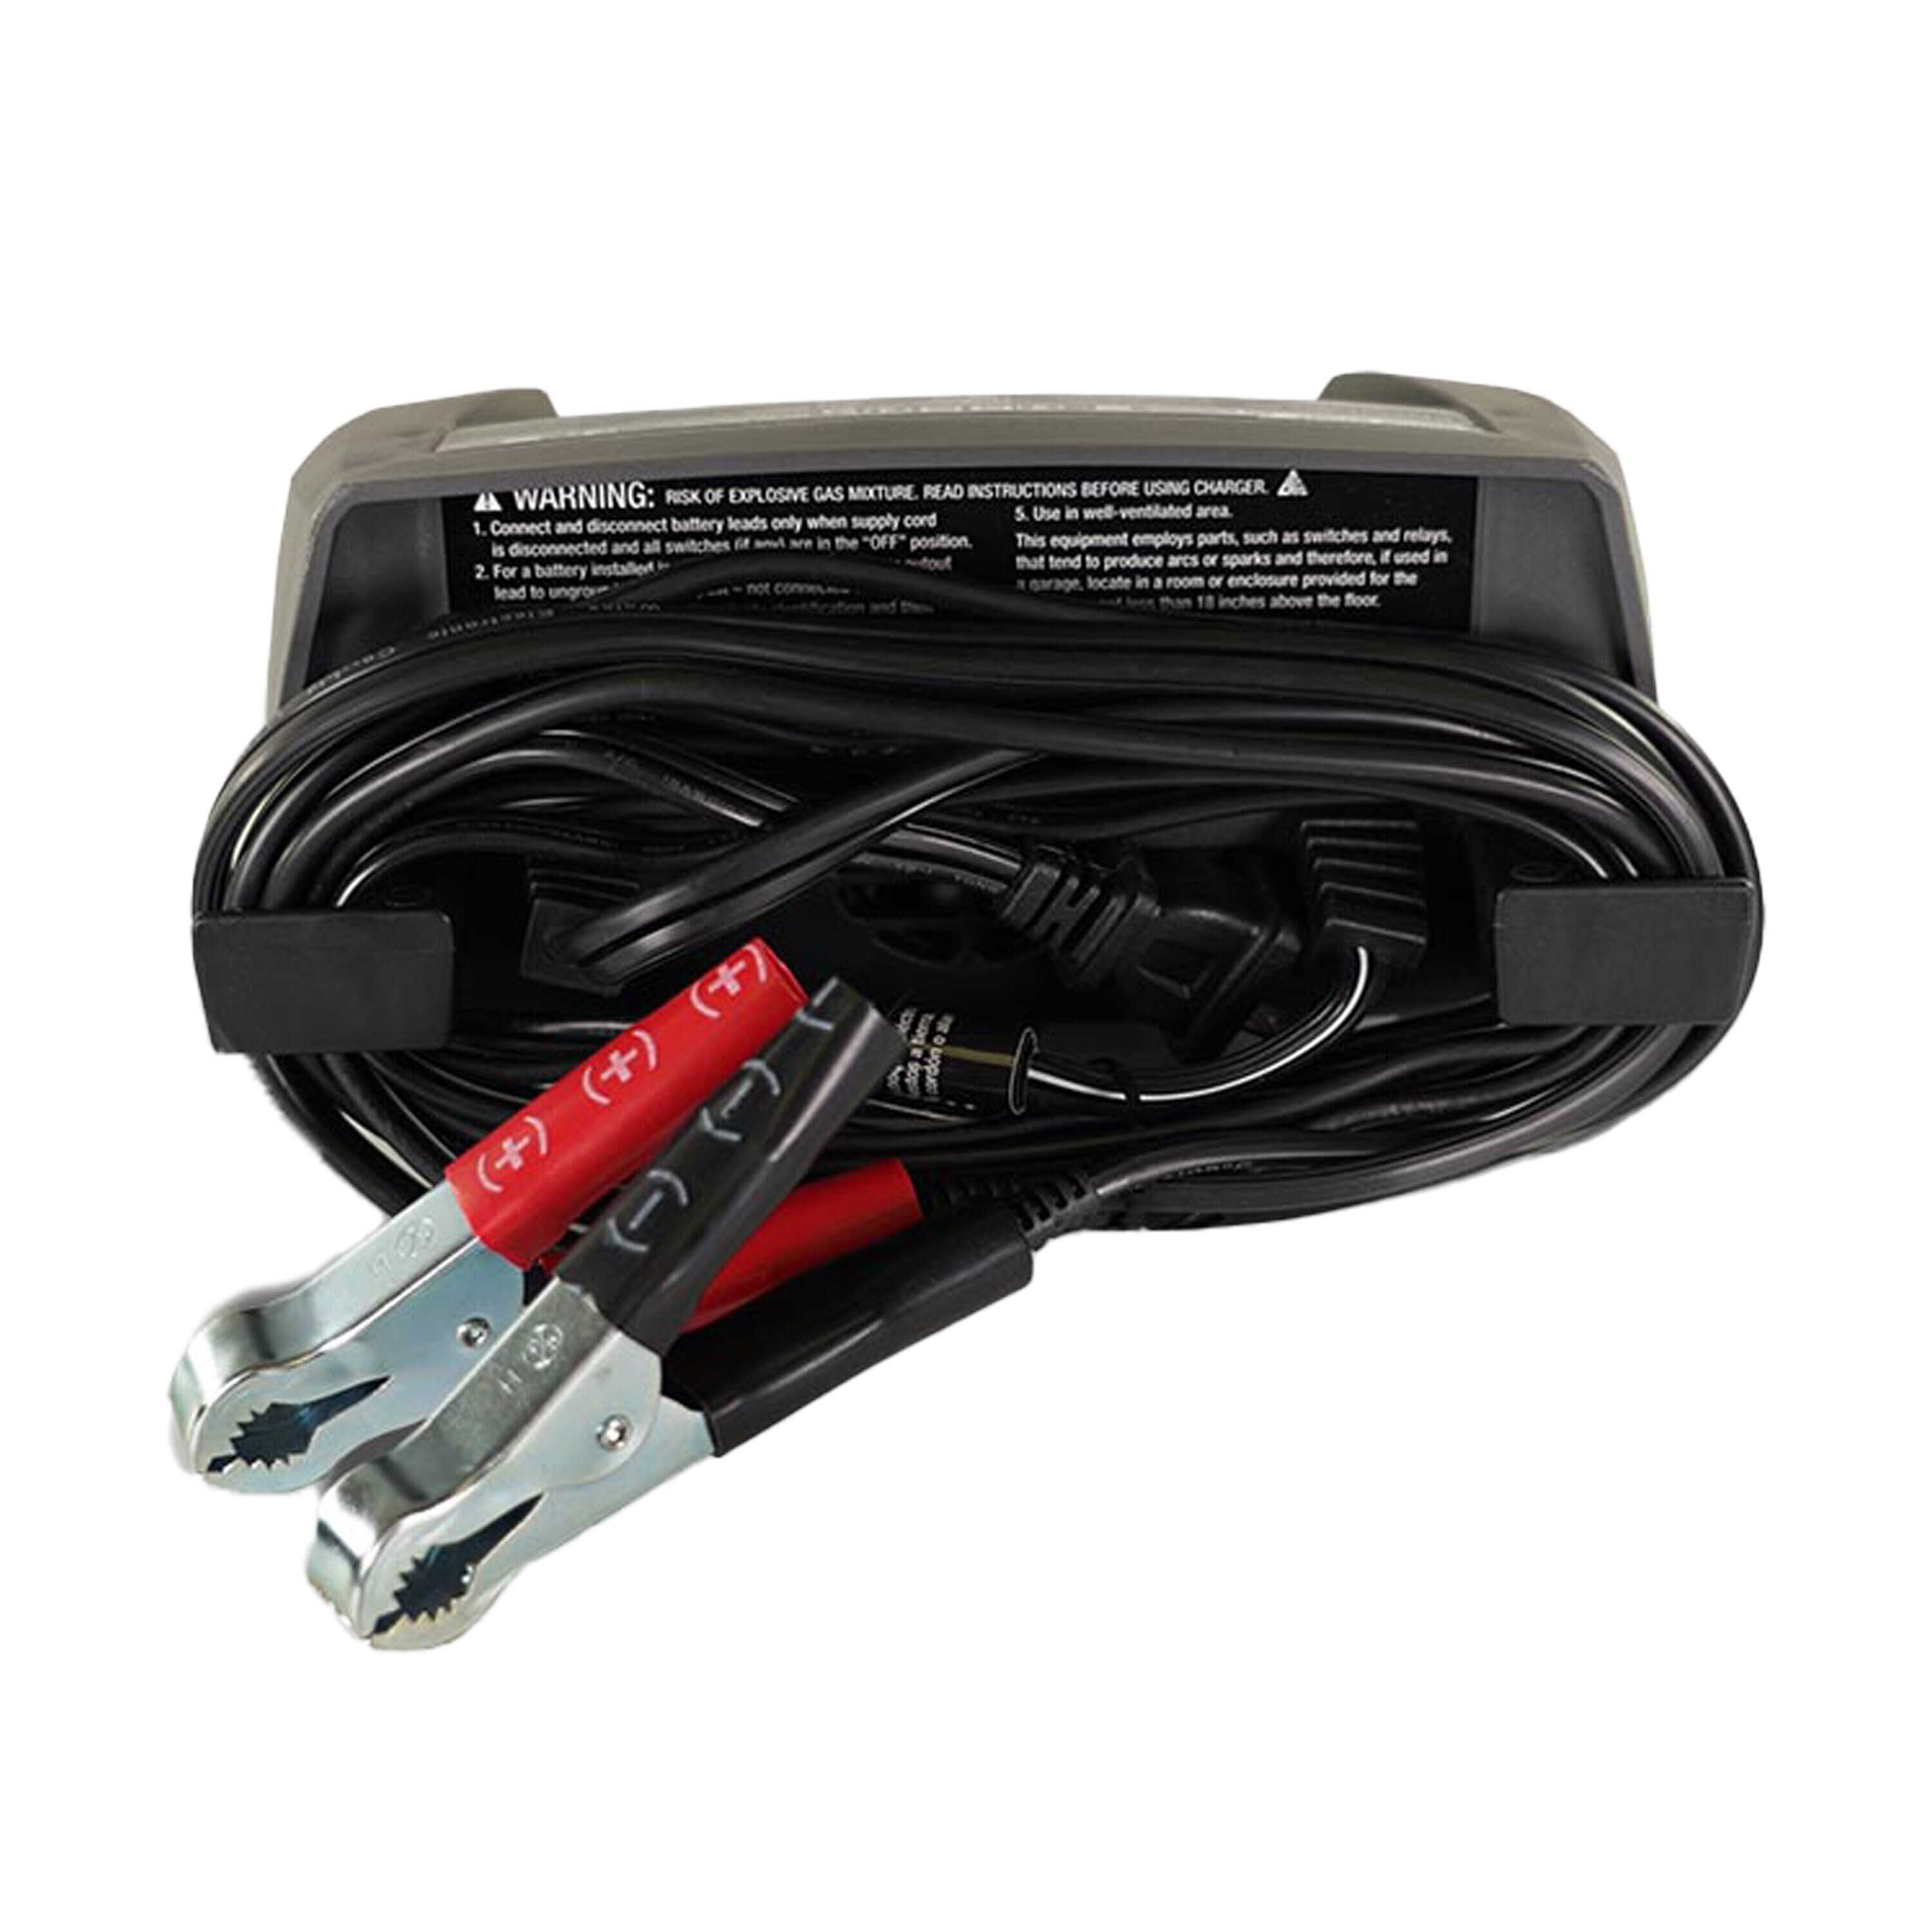 12v 10 amp Lithium Ion Battery Charger